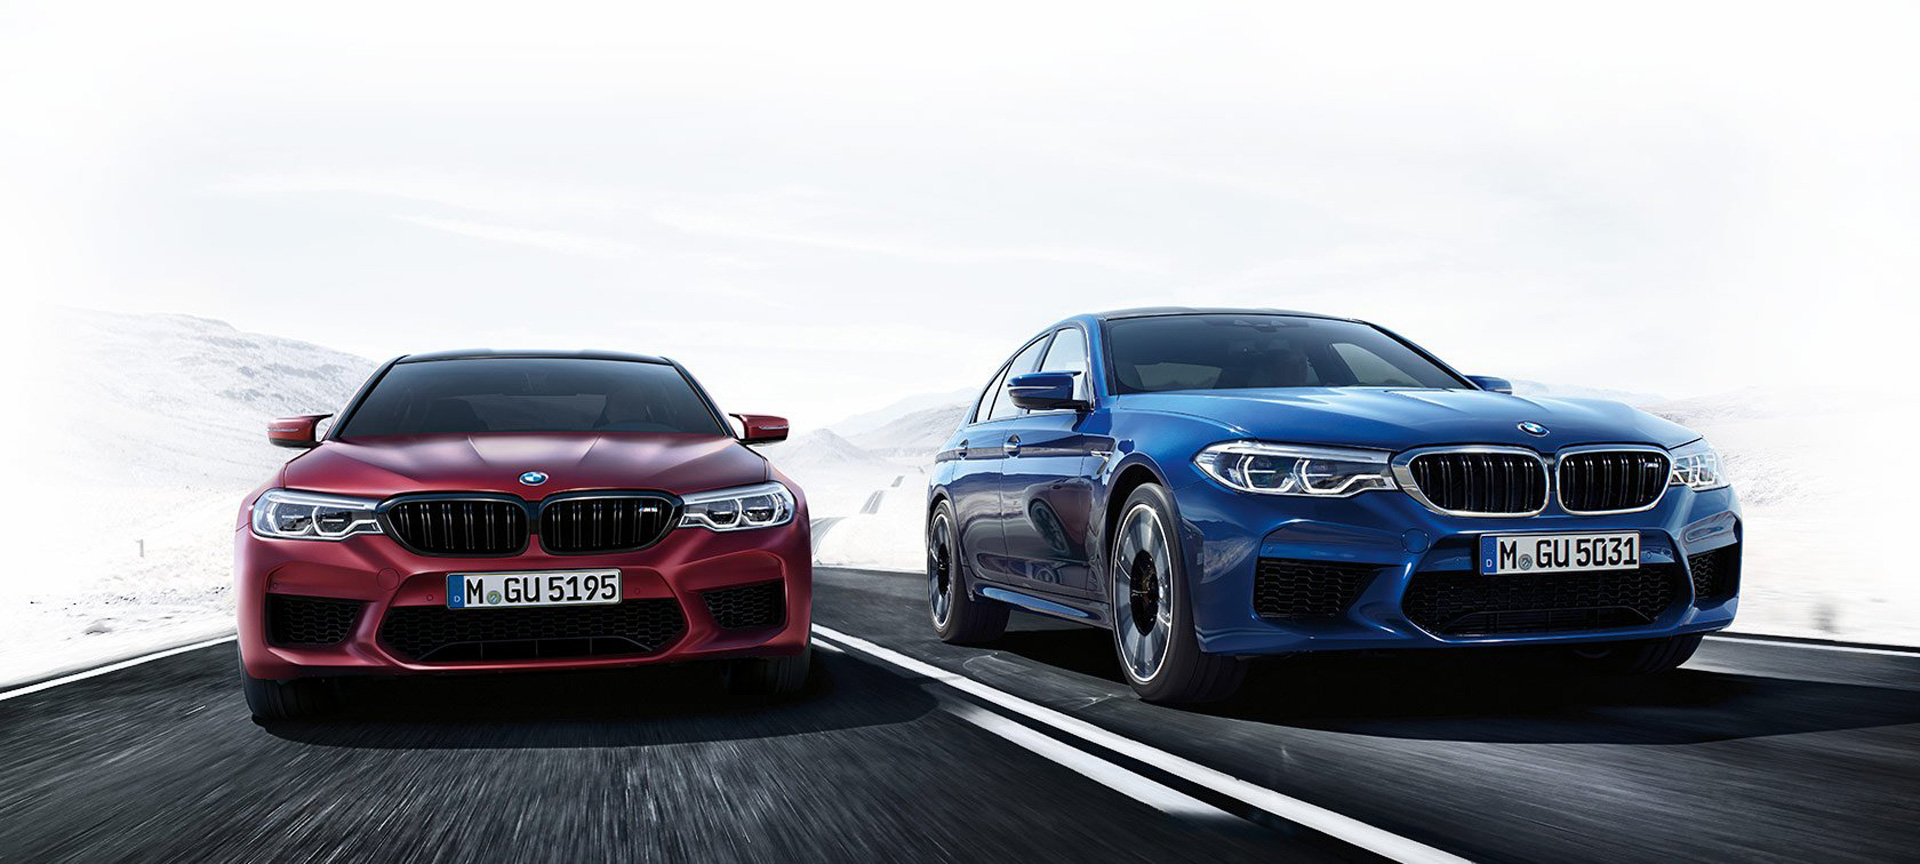 STARTING AT INCREDIBLE.
The all-new BMW M5 with M xDrive.
Find out more